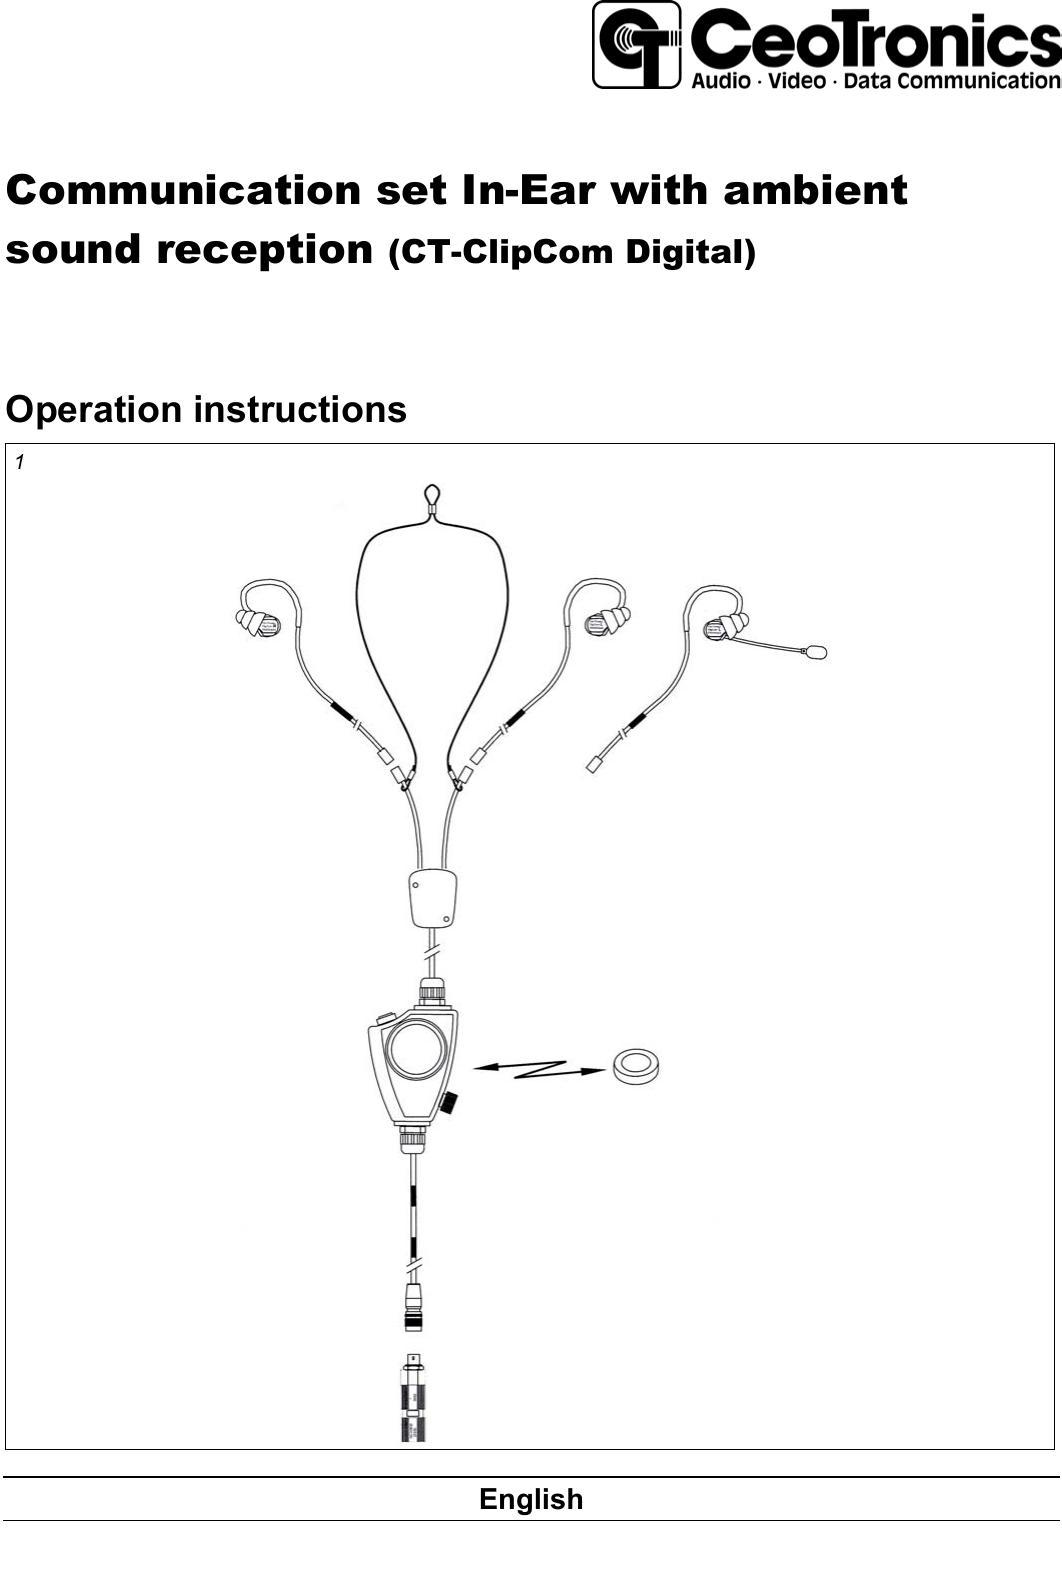        Communication set In-Ear with ambient sound reception (CT-ClipCom Digital)   Operation instructions 1   English 